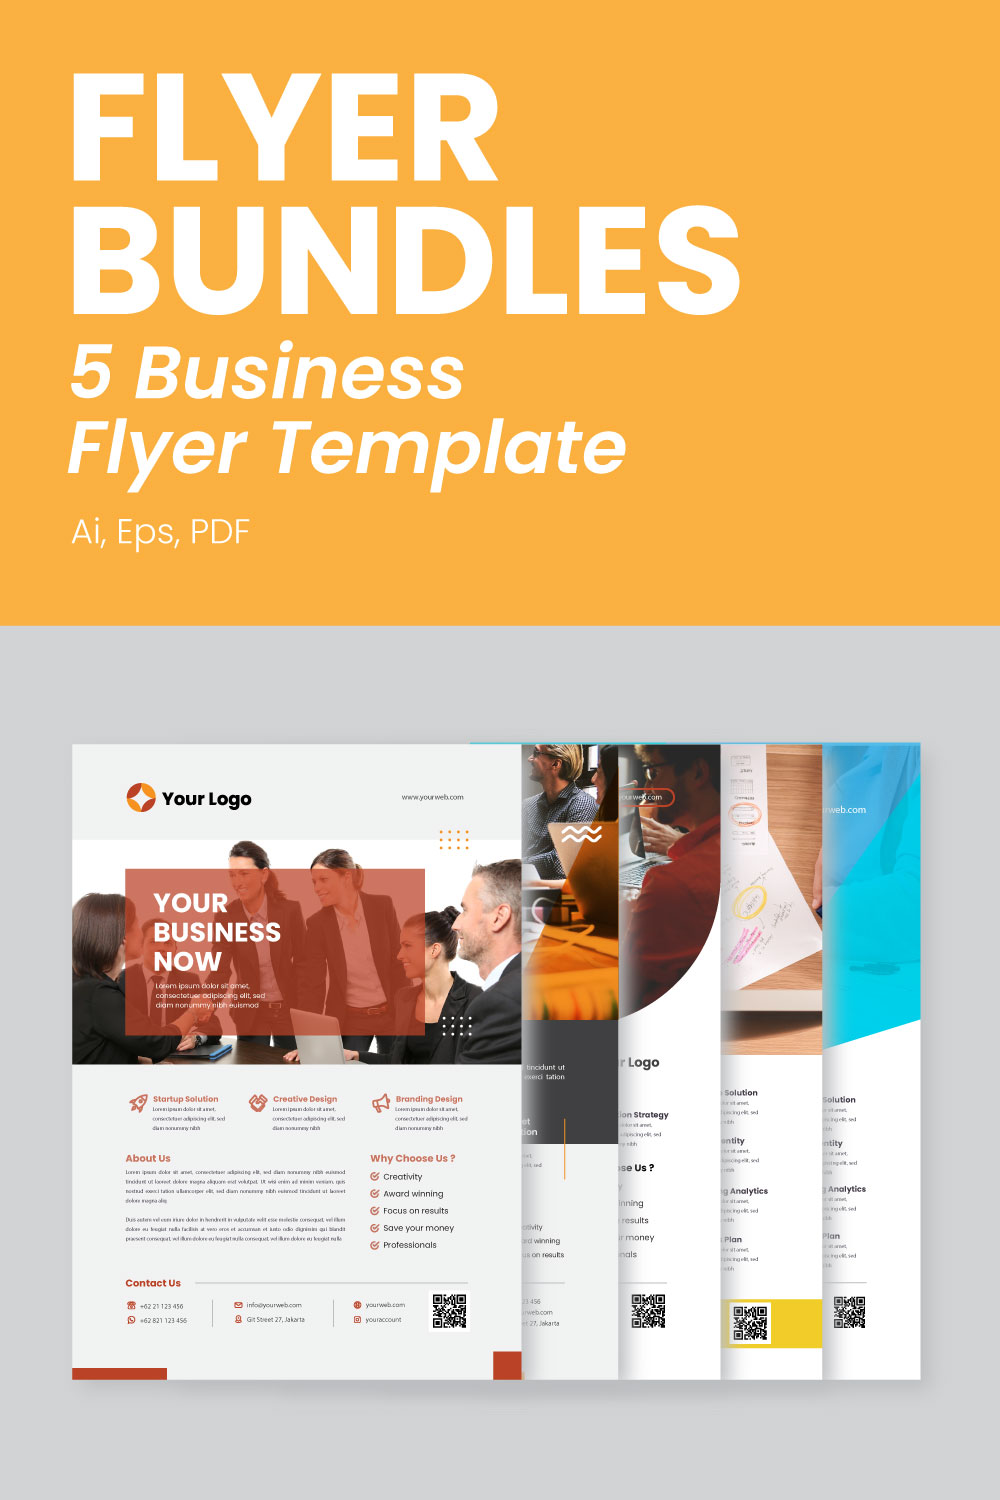 Business flyer layout template in A4 size.